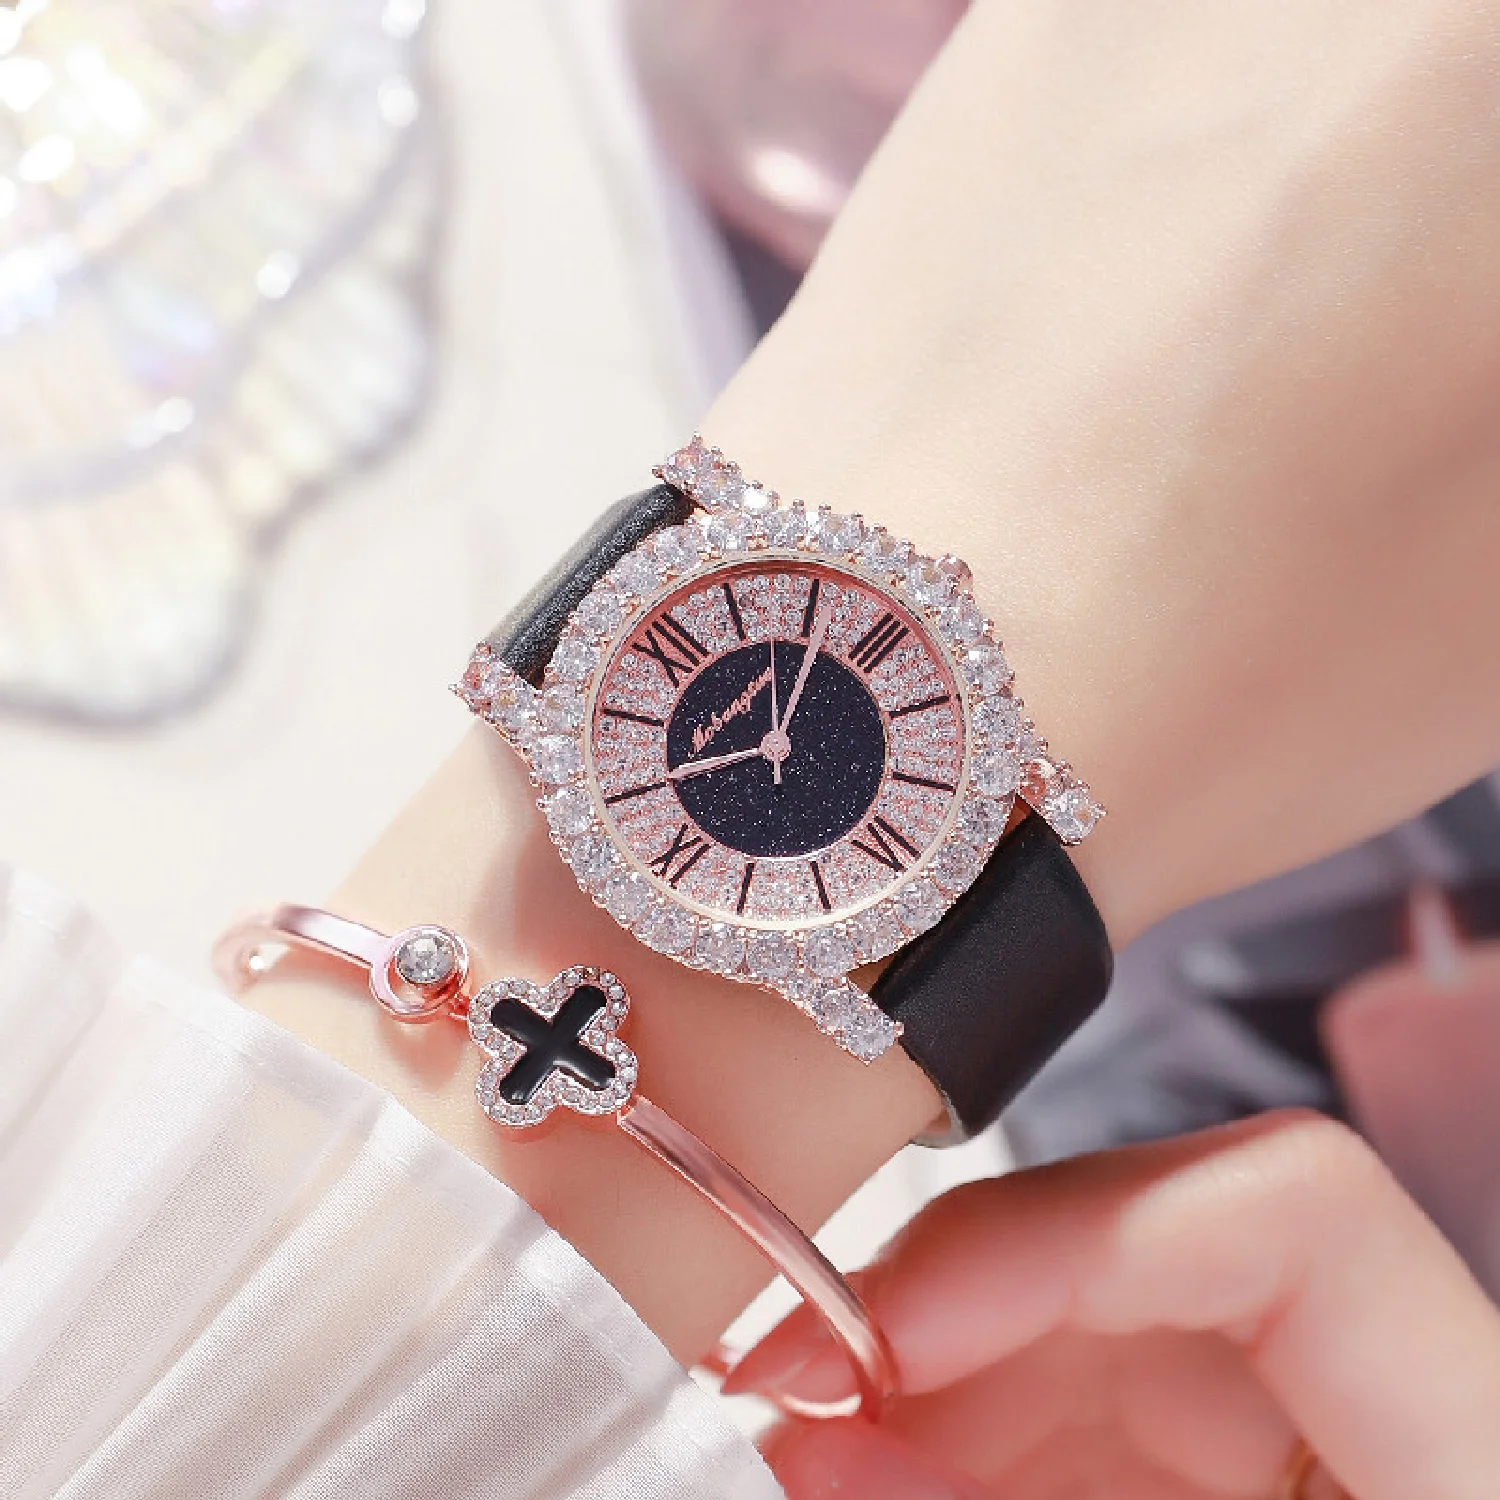 Red Luxury Diamond Fashion Women Watches Ladies Quartz Wristwatches Leather Female Clock Romantic Gifts Timepiece Drop Shipping enlarge